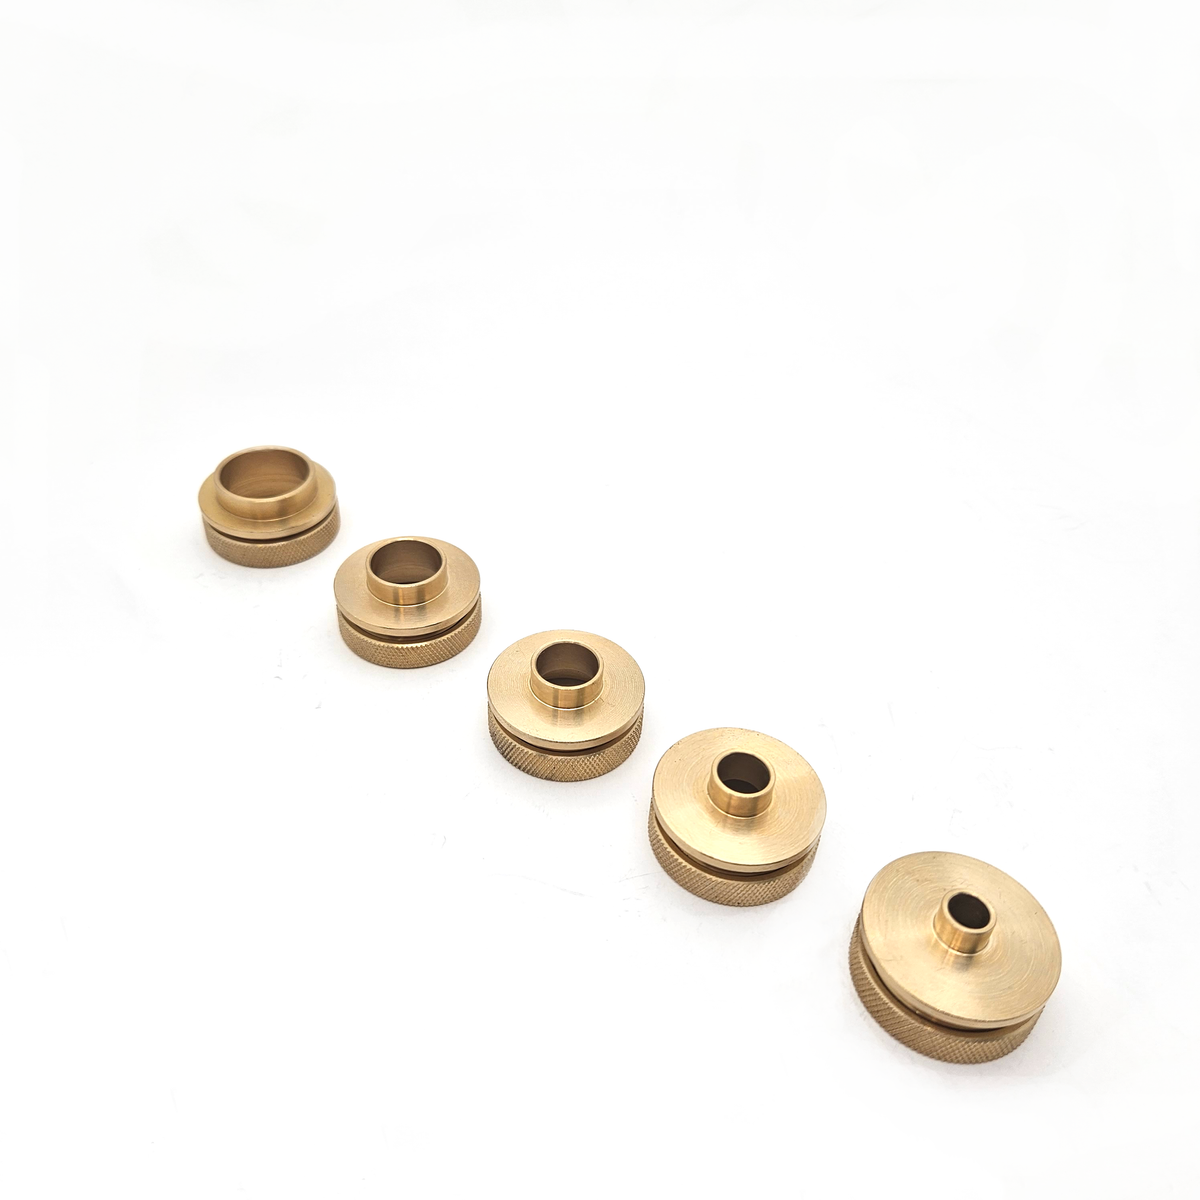 11 Pcs/set Brass Template Router Guides With Lock Nut Adapter 10